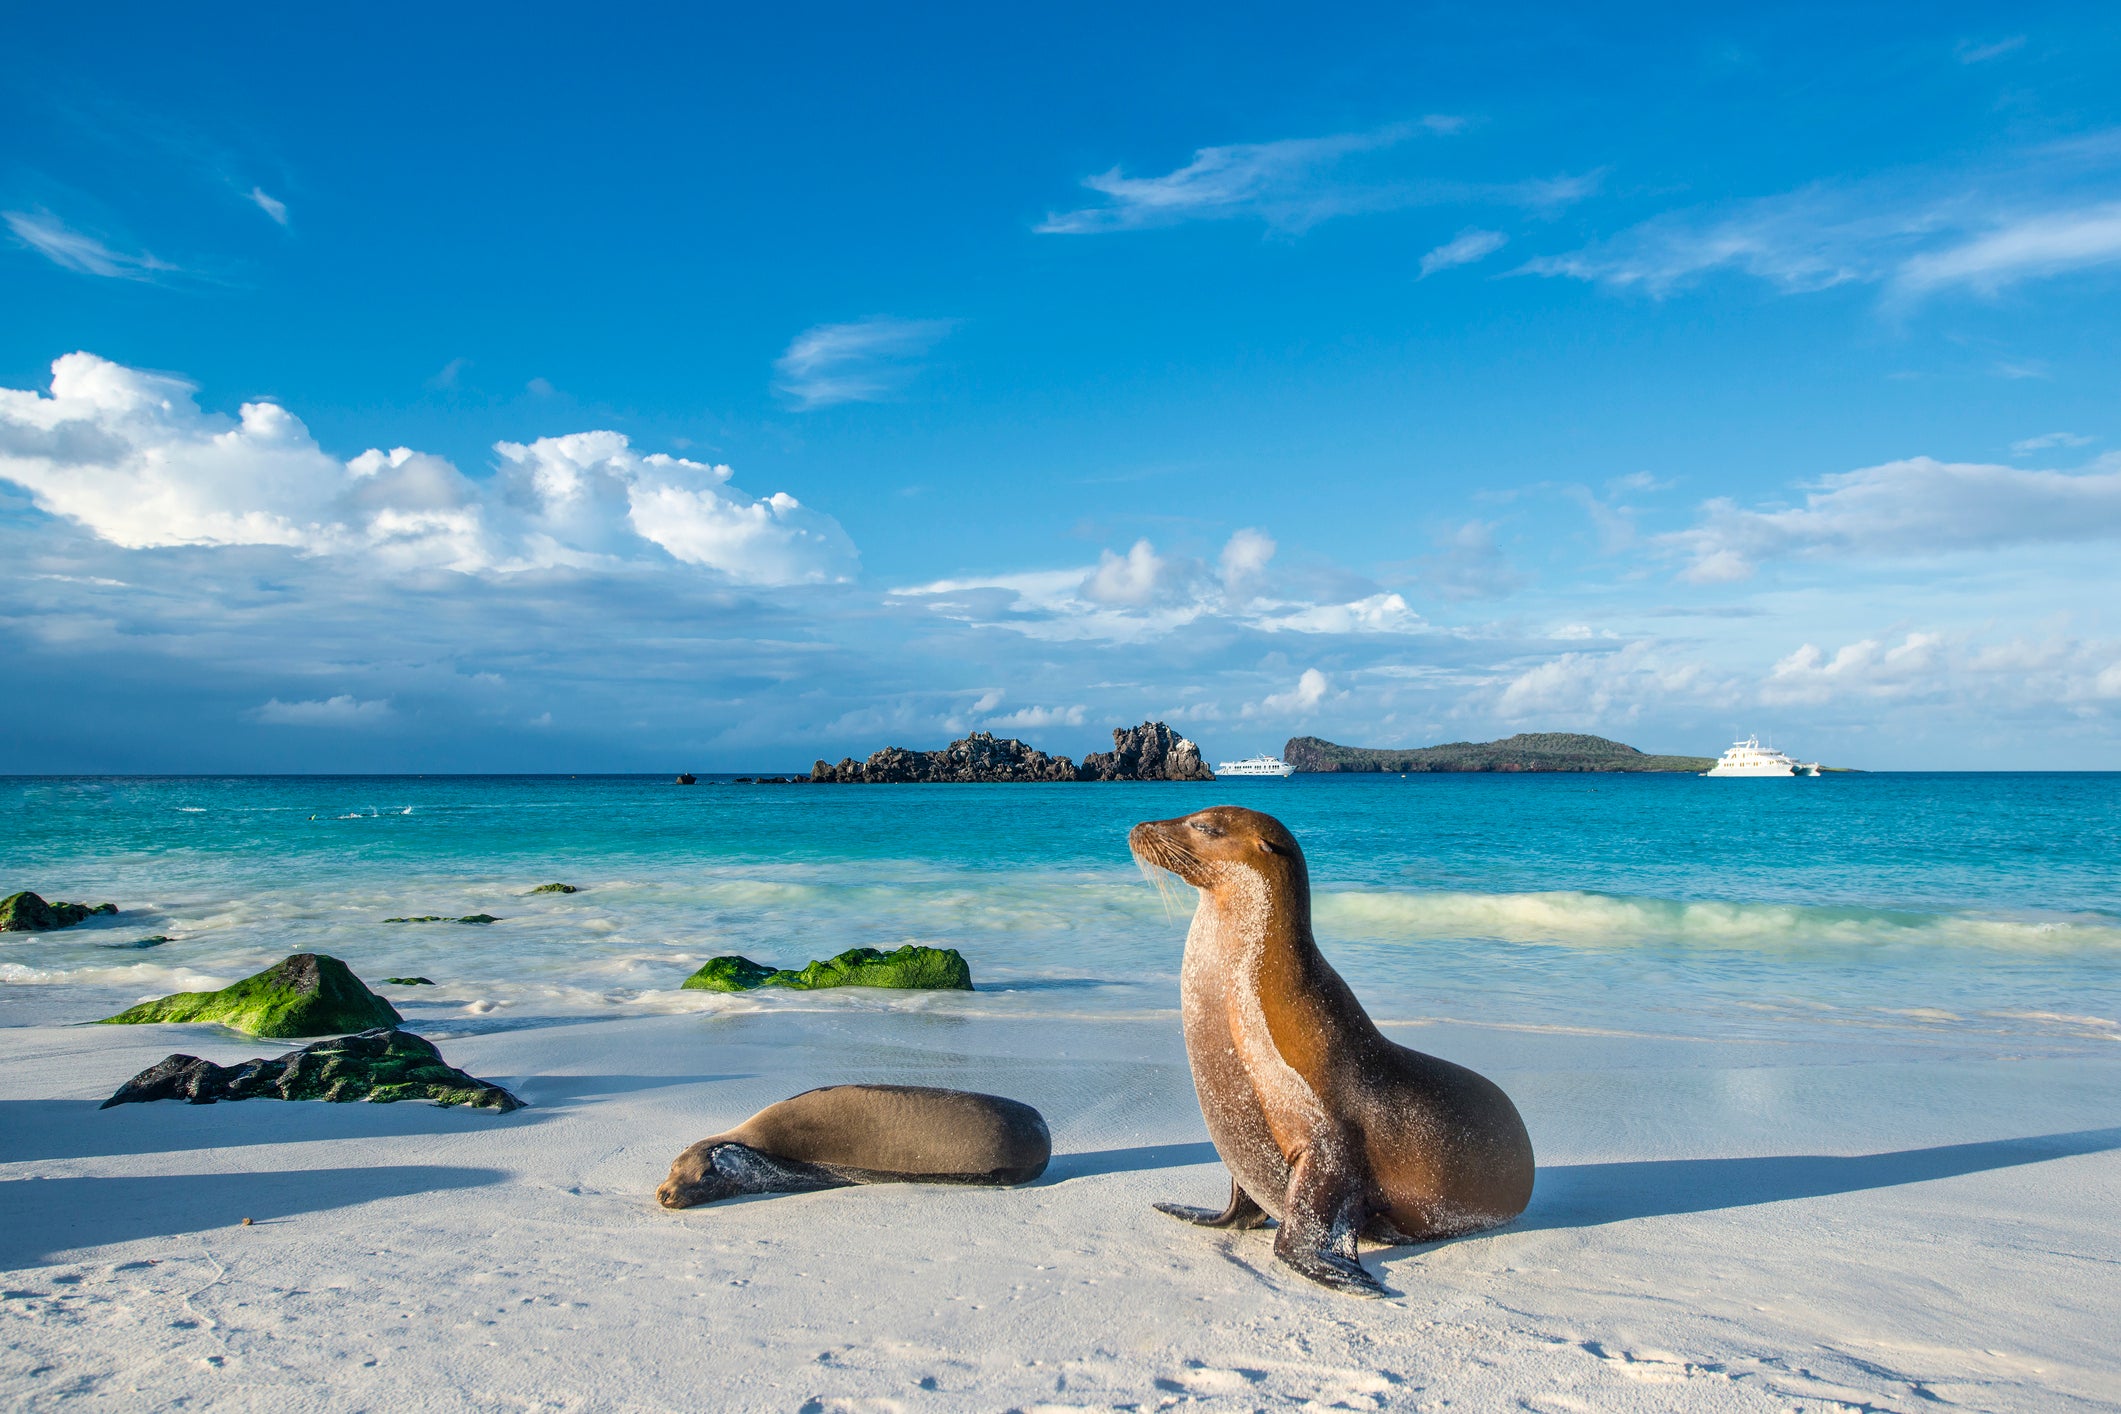 Ring in the New Year on a loop of the Galapagos Islands